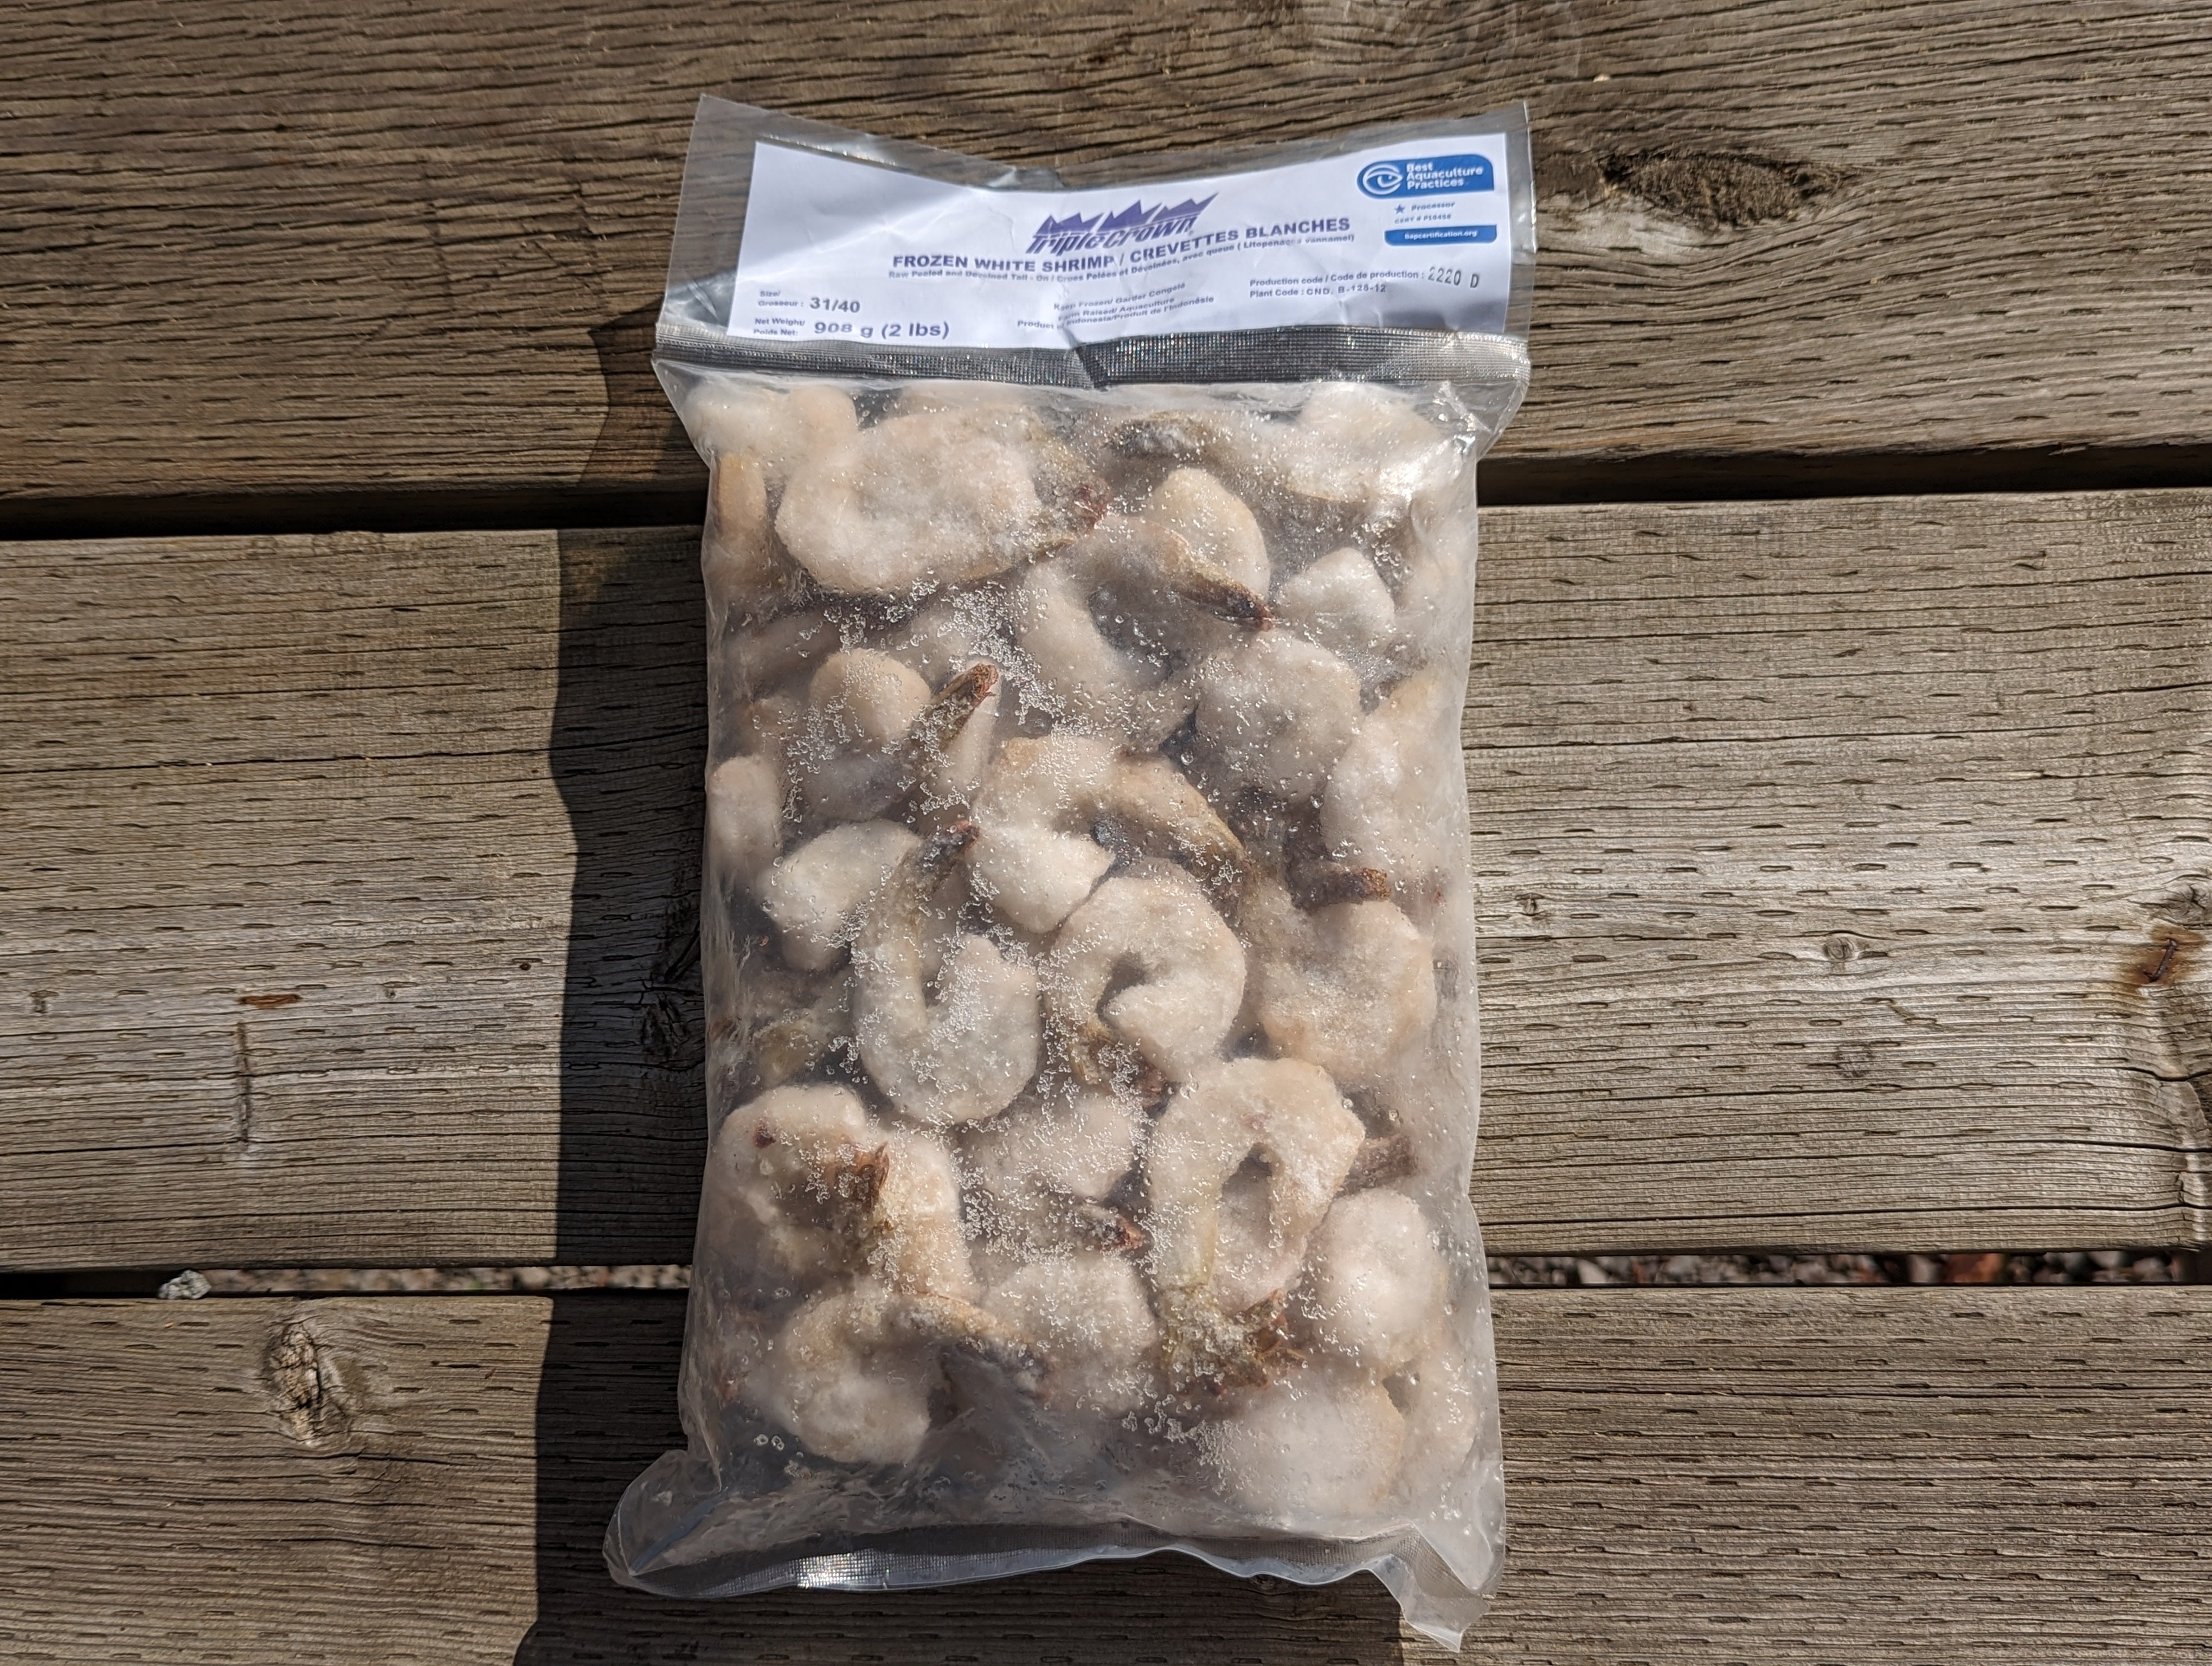 Raw White Peeled and Deveined Shrimp - Frozen (2lbs)